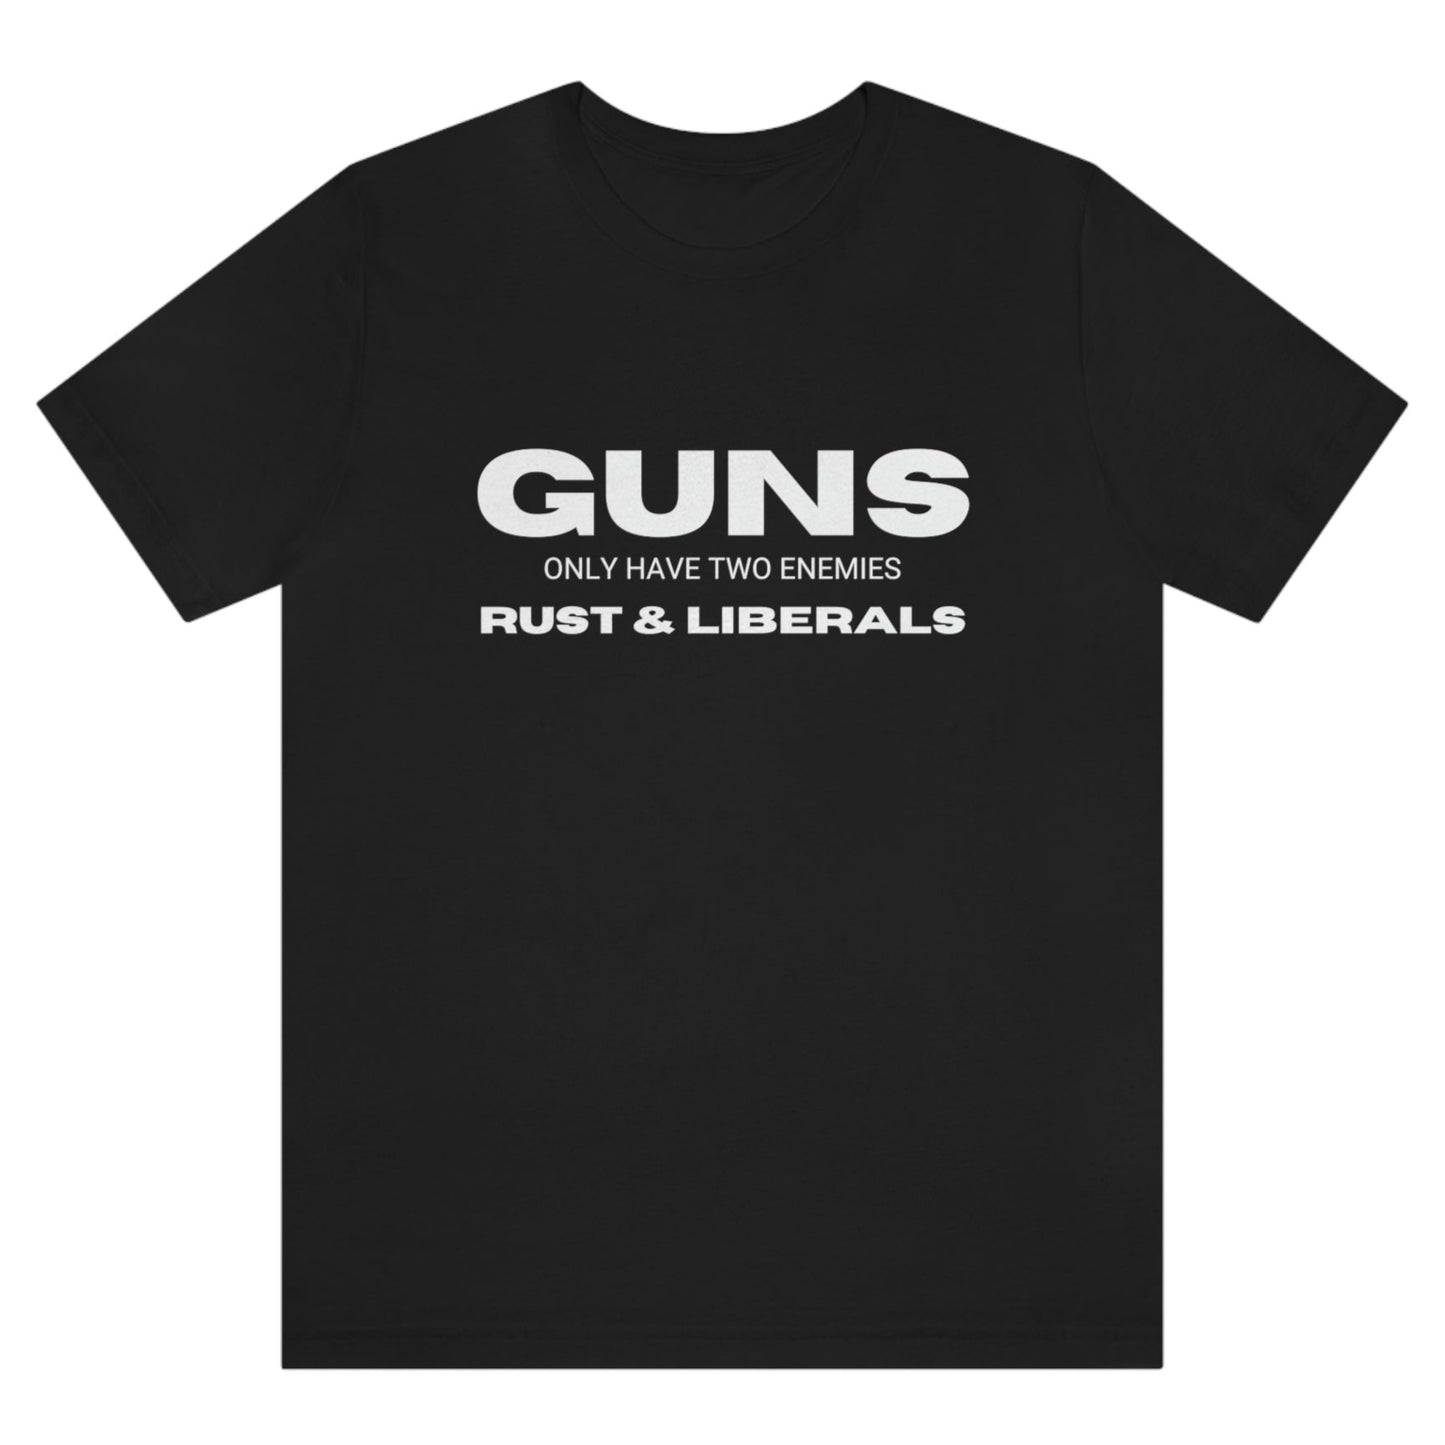 guns-only-have-two-enemies-rust-and-liberals-black-t-shirt-2a-second-amendment